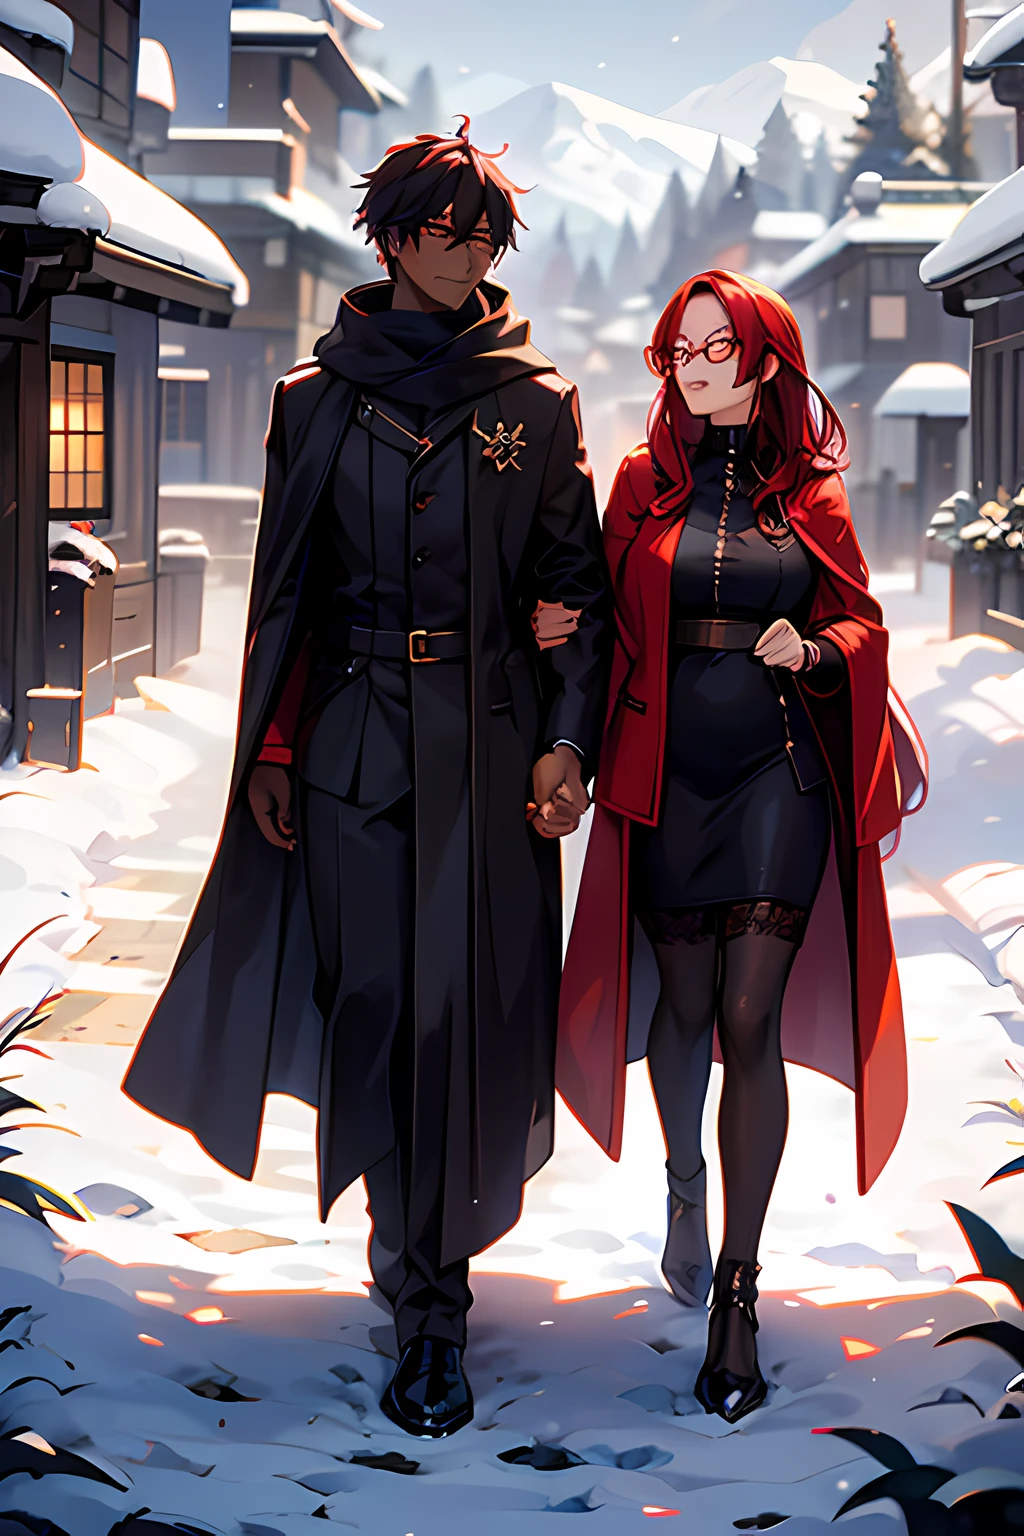 25 year old dark skinned male in a dark cloak with red eyes takes mature woman with red hair, glasses and black dress on a walk through the snow while holding hands